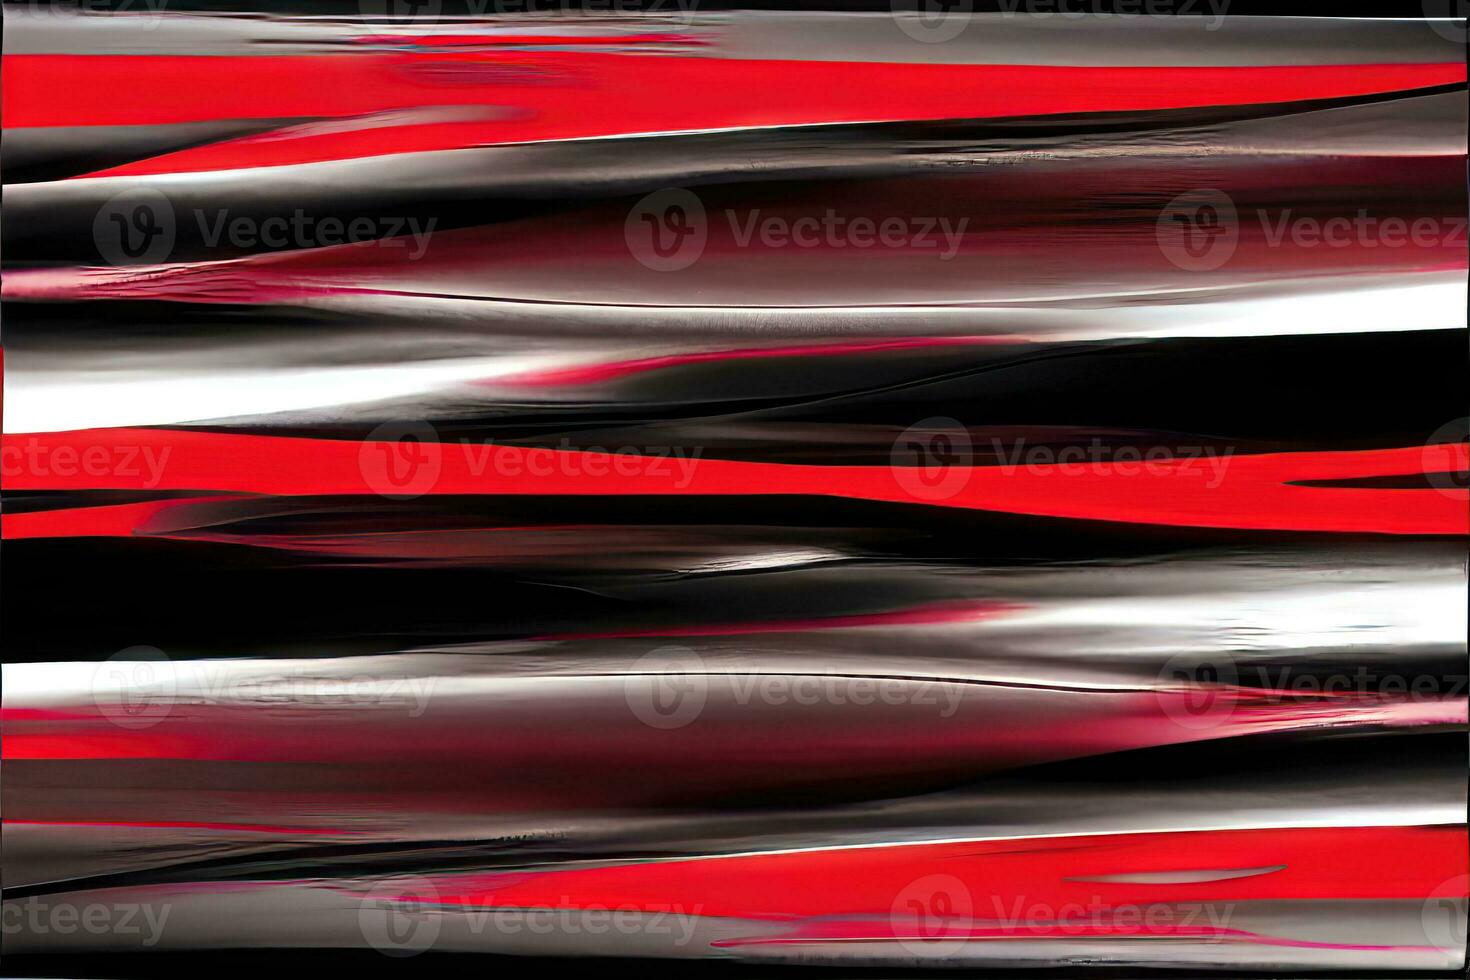 red and black modern texture pattern art photo